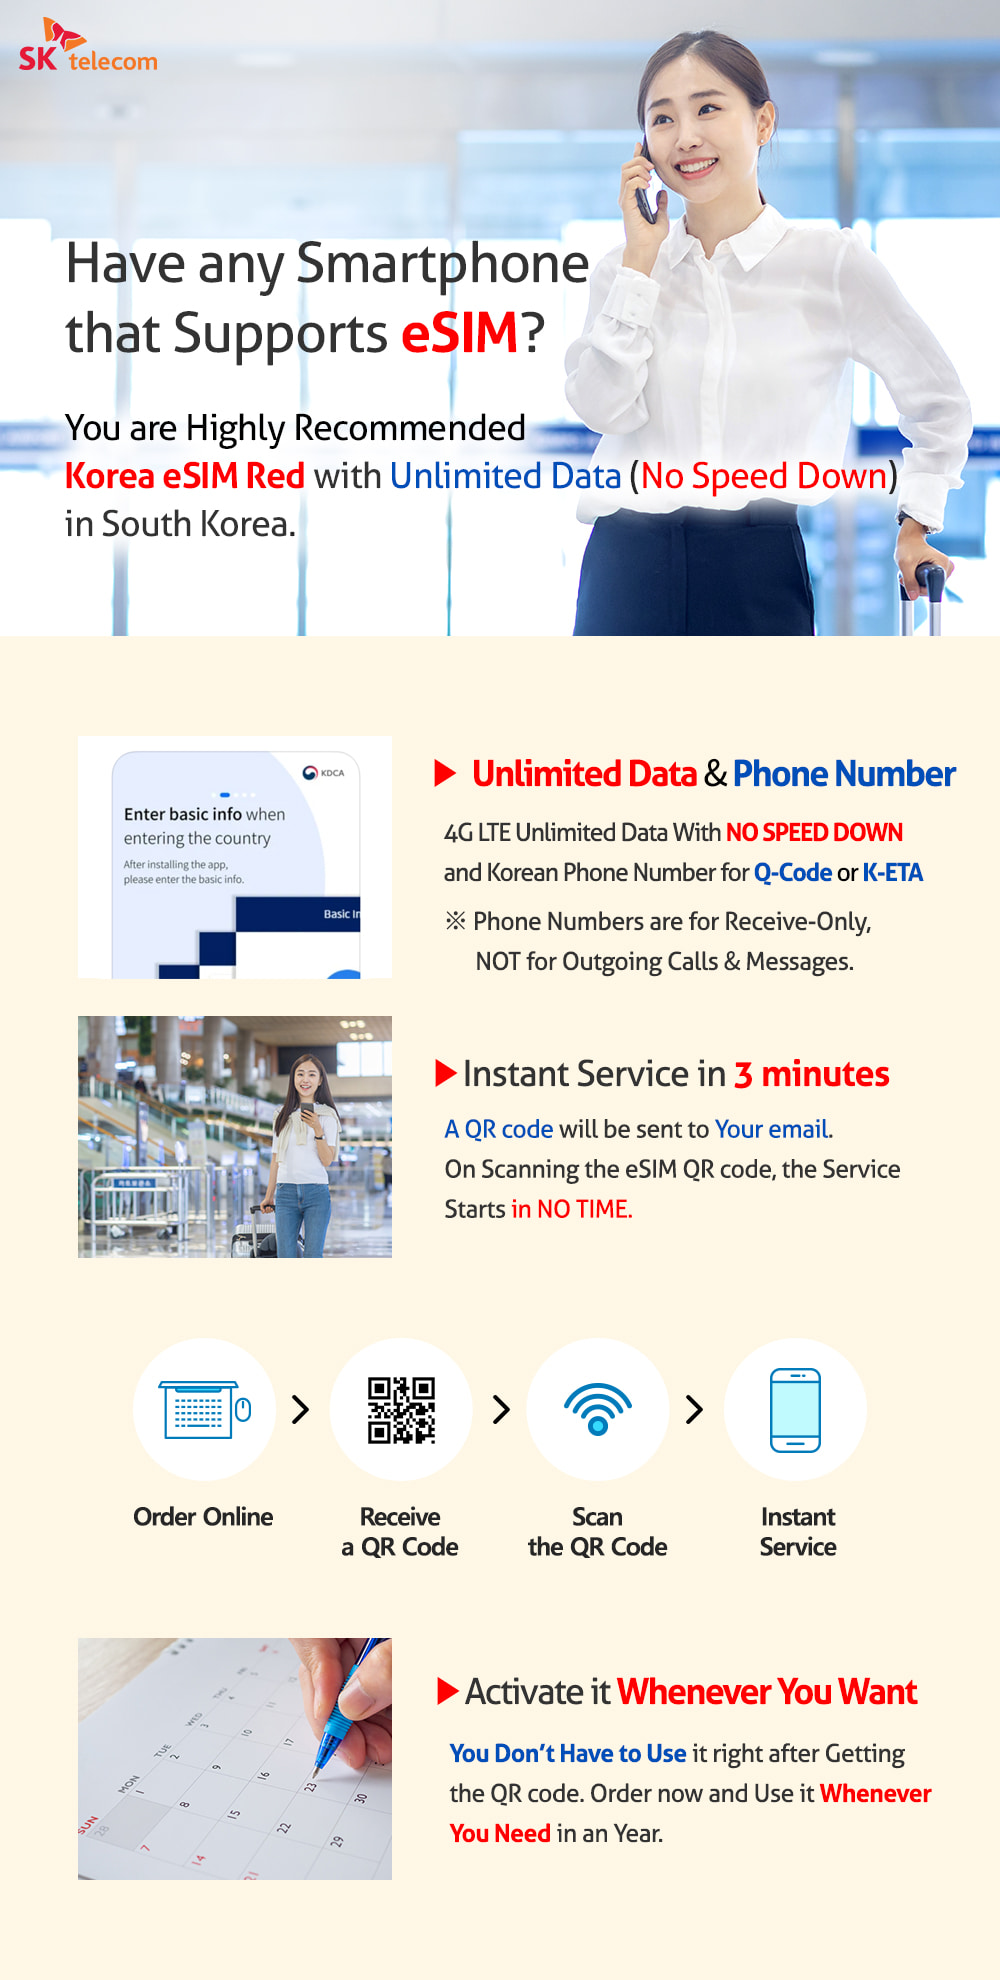 Have any smartphone that supports eSIM? Korea eSIM RED with Unlimited Data(No speed dowm) in South Korea. A QR code will be sent to Your email. Activate it whenever you want